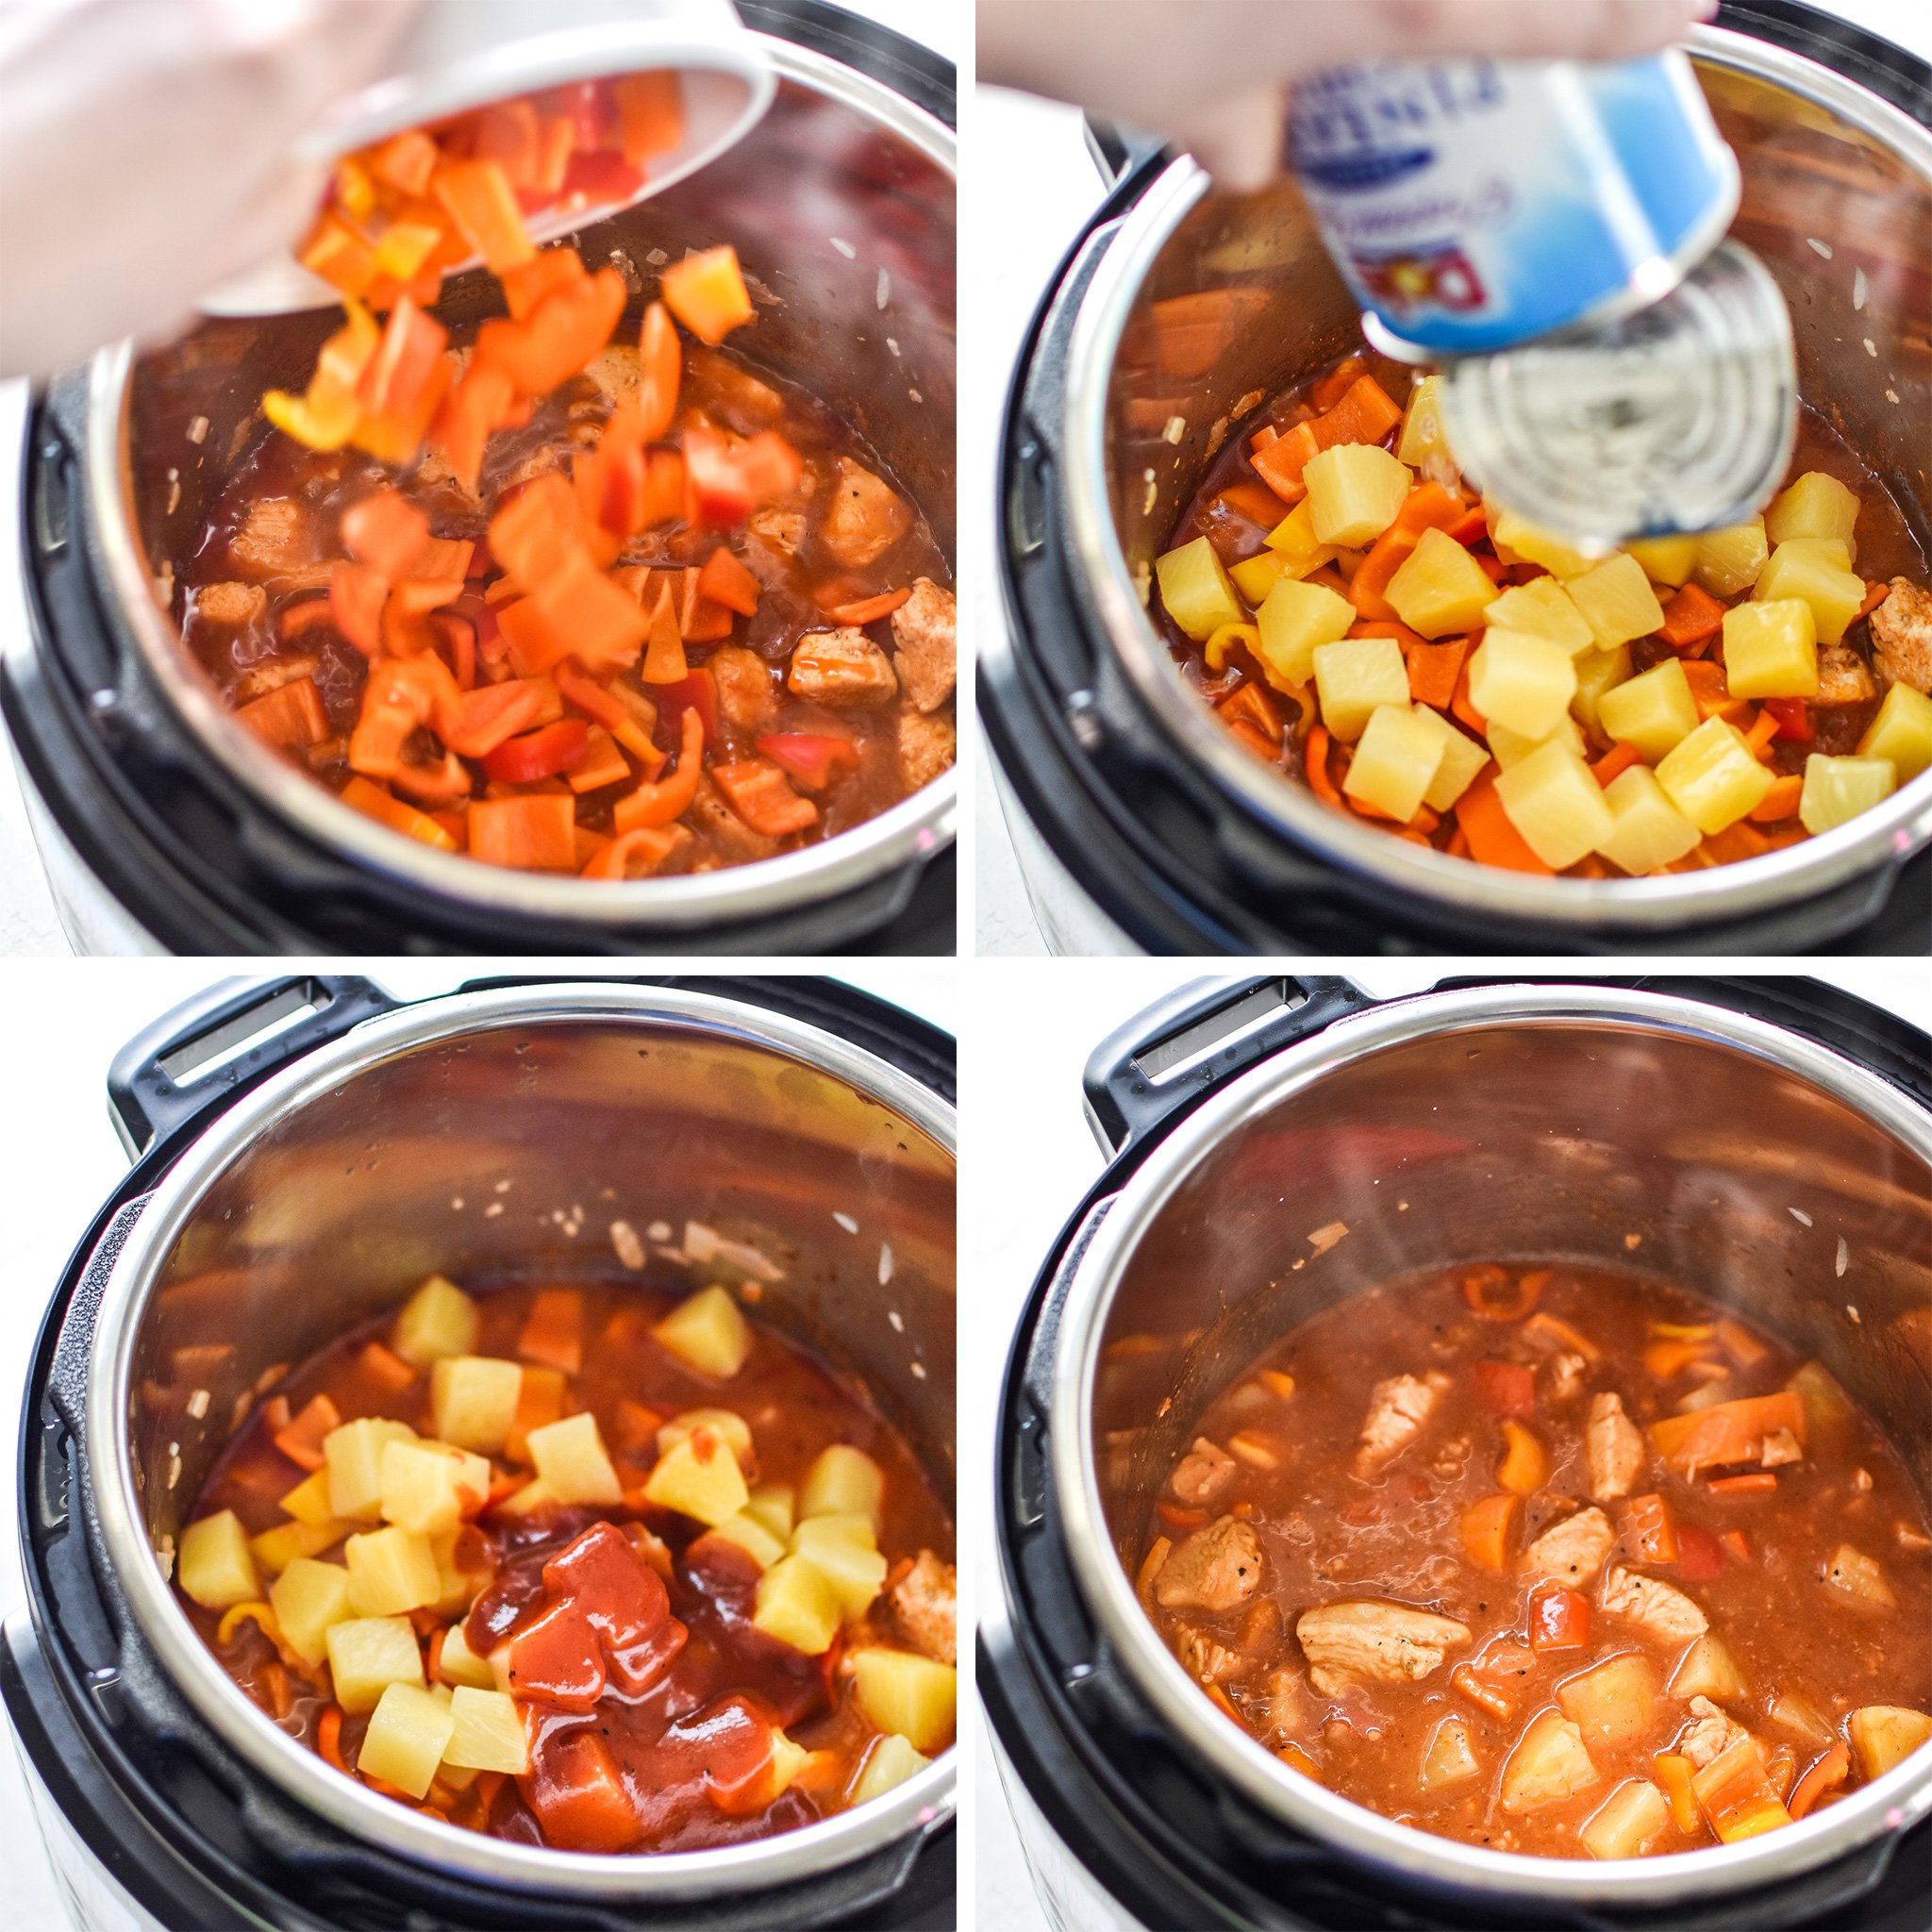 Step by step photos of the Sweet Ginger BBQ Chicken Meal Prep being made in the Instant Pot.